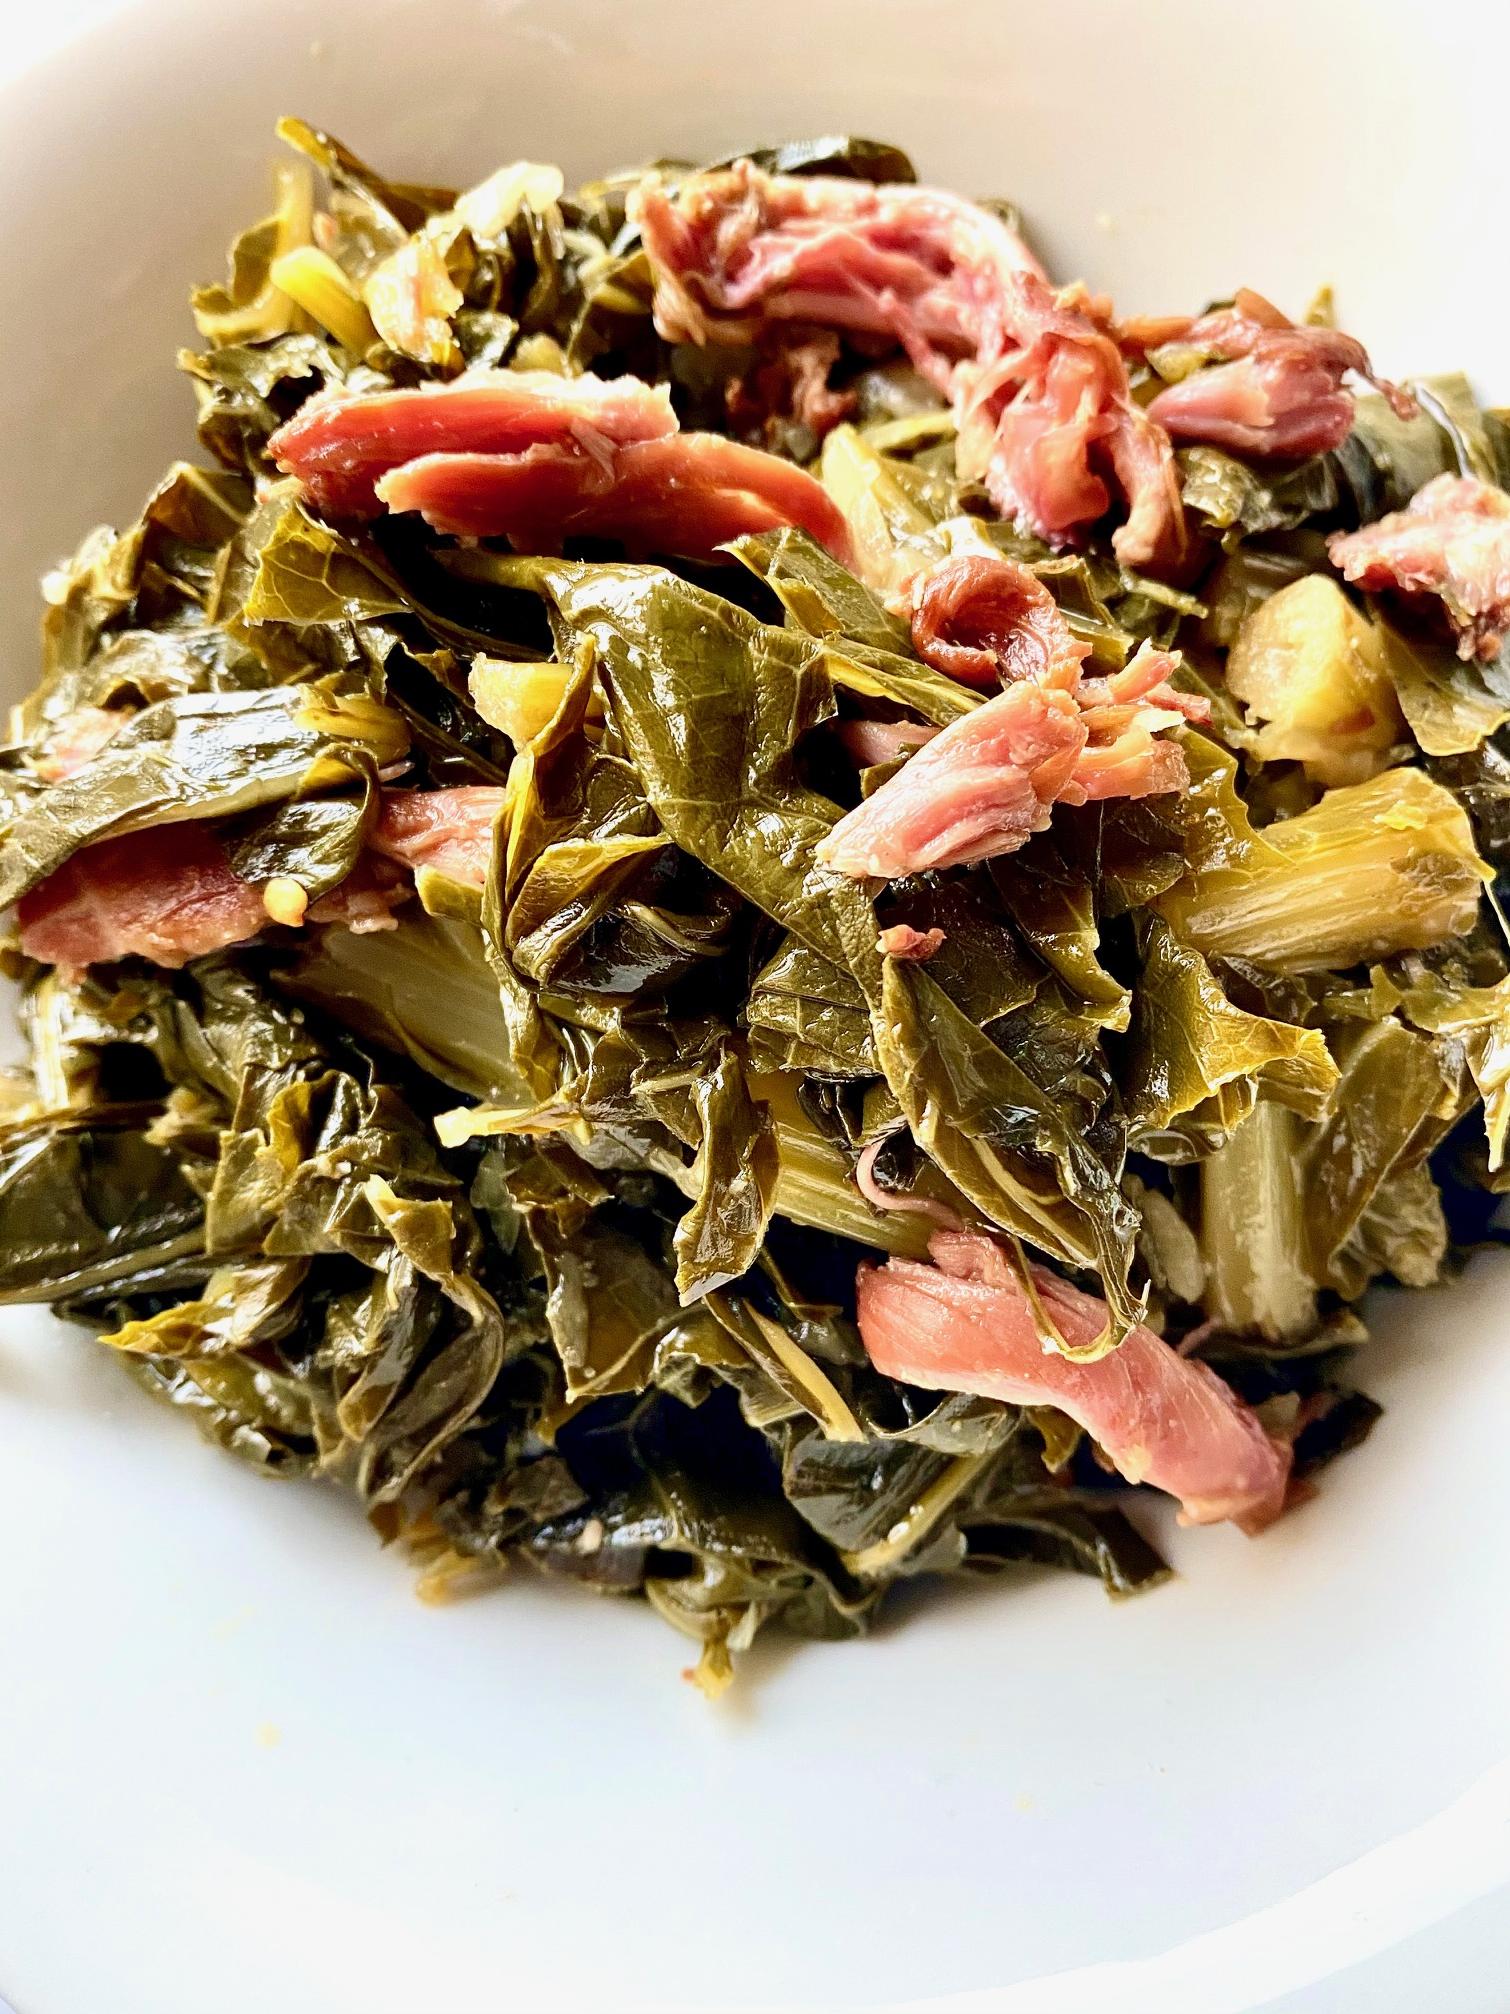  Steaming hot and oh so fresh: these collard greens are the perfect comfort food.